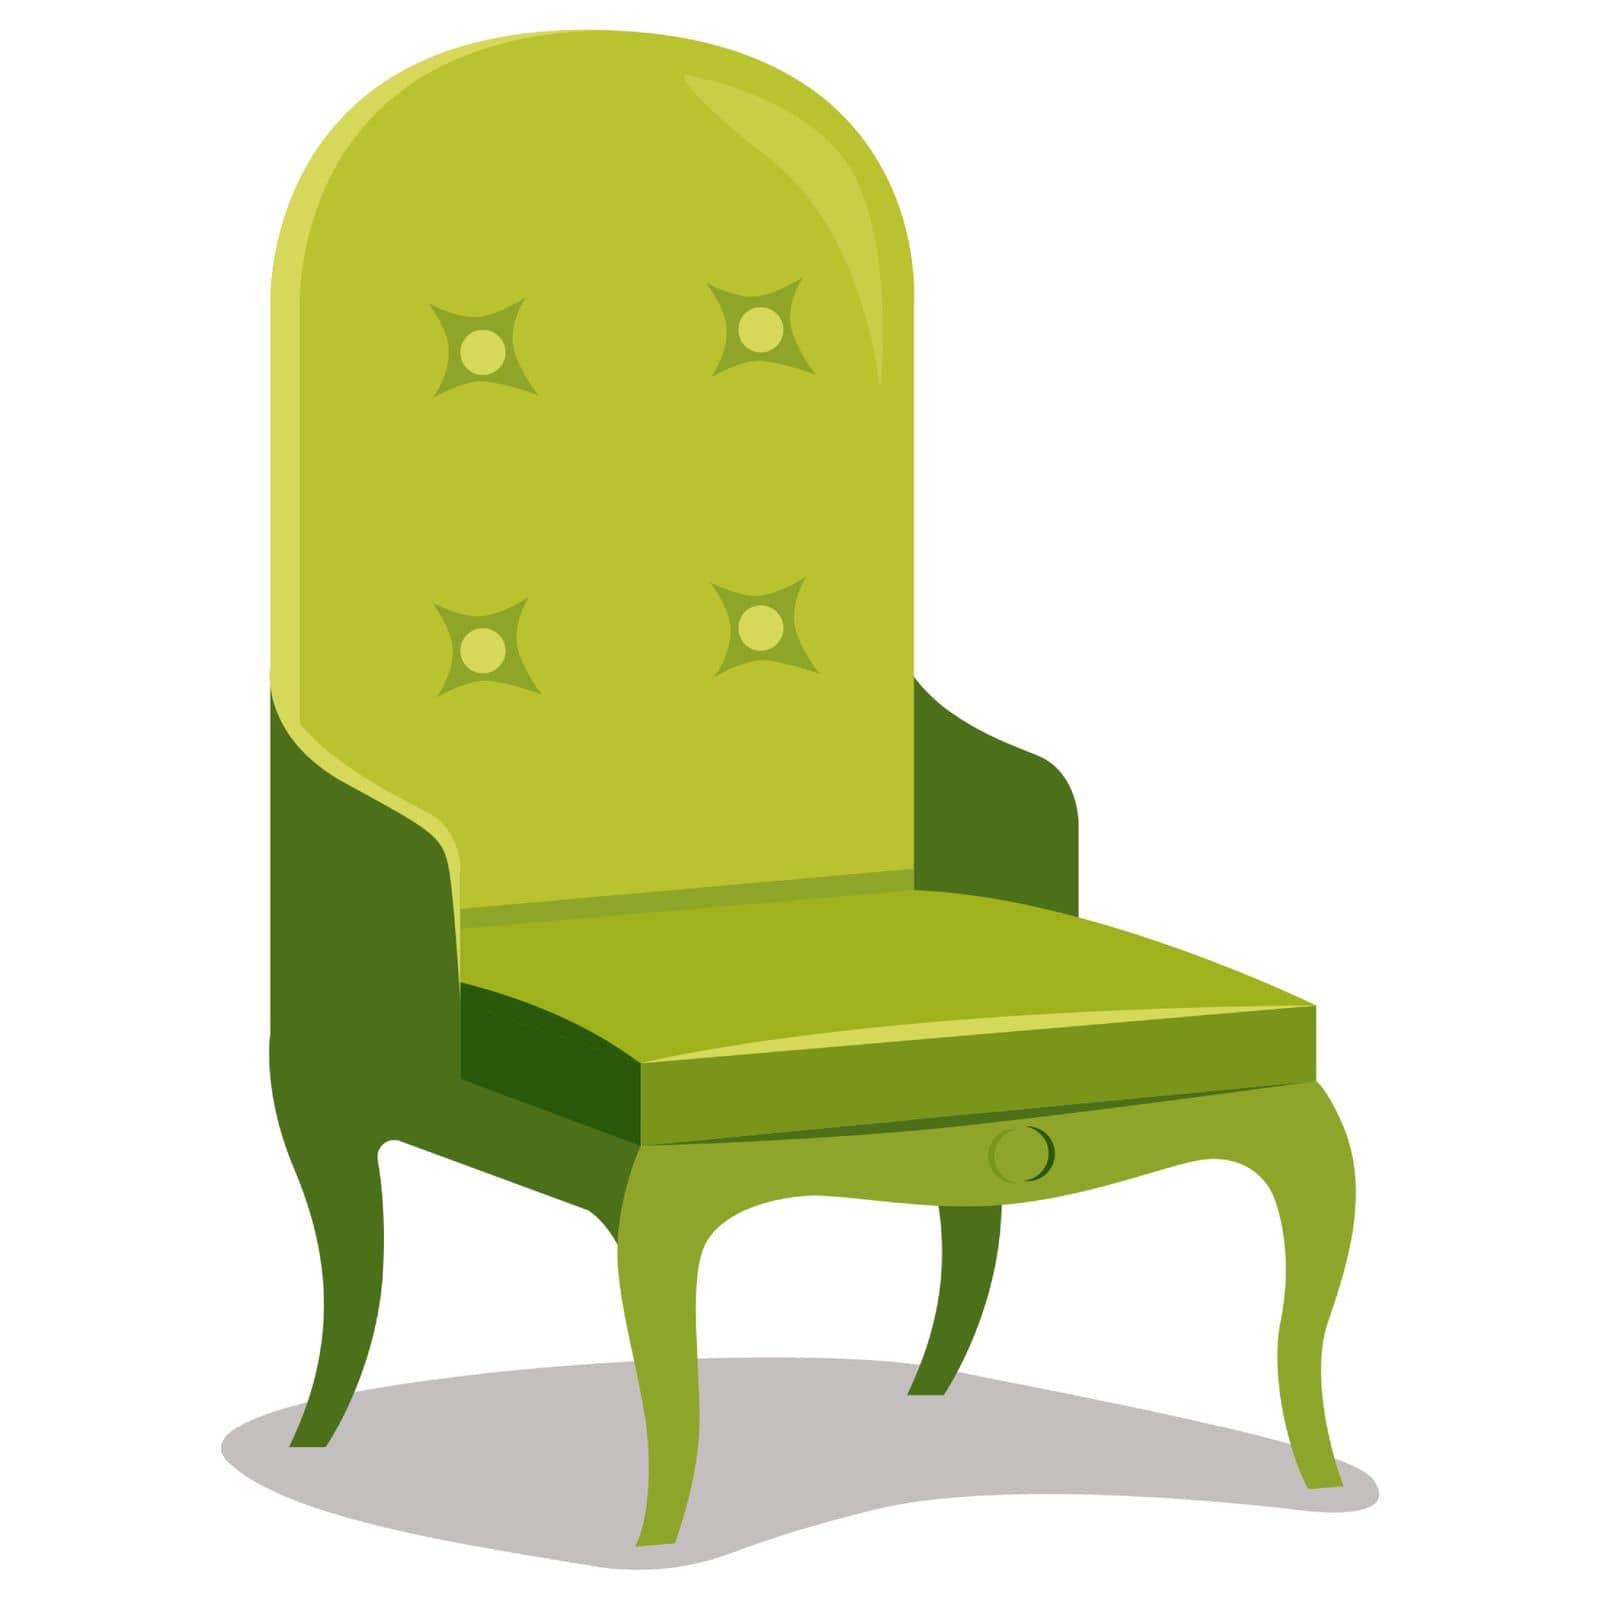 green upholstered armchair for the home. home interior furniture. by PlutusART